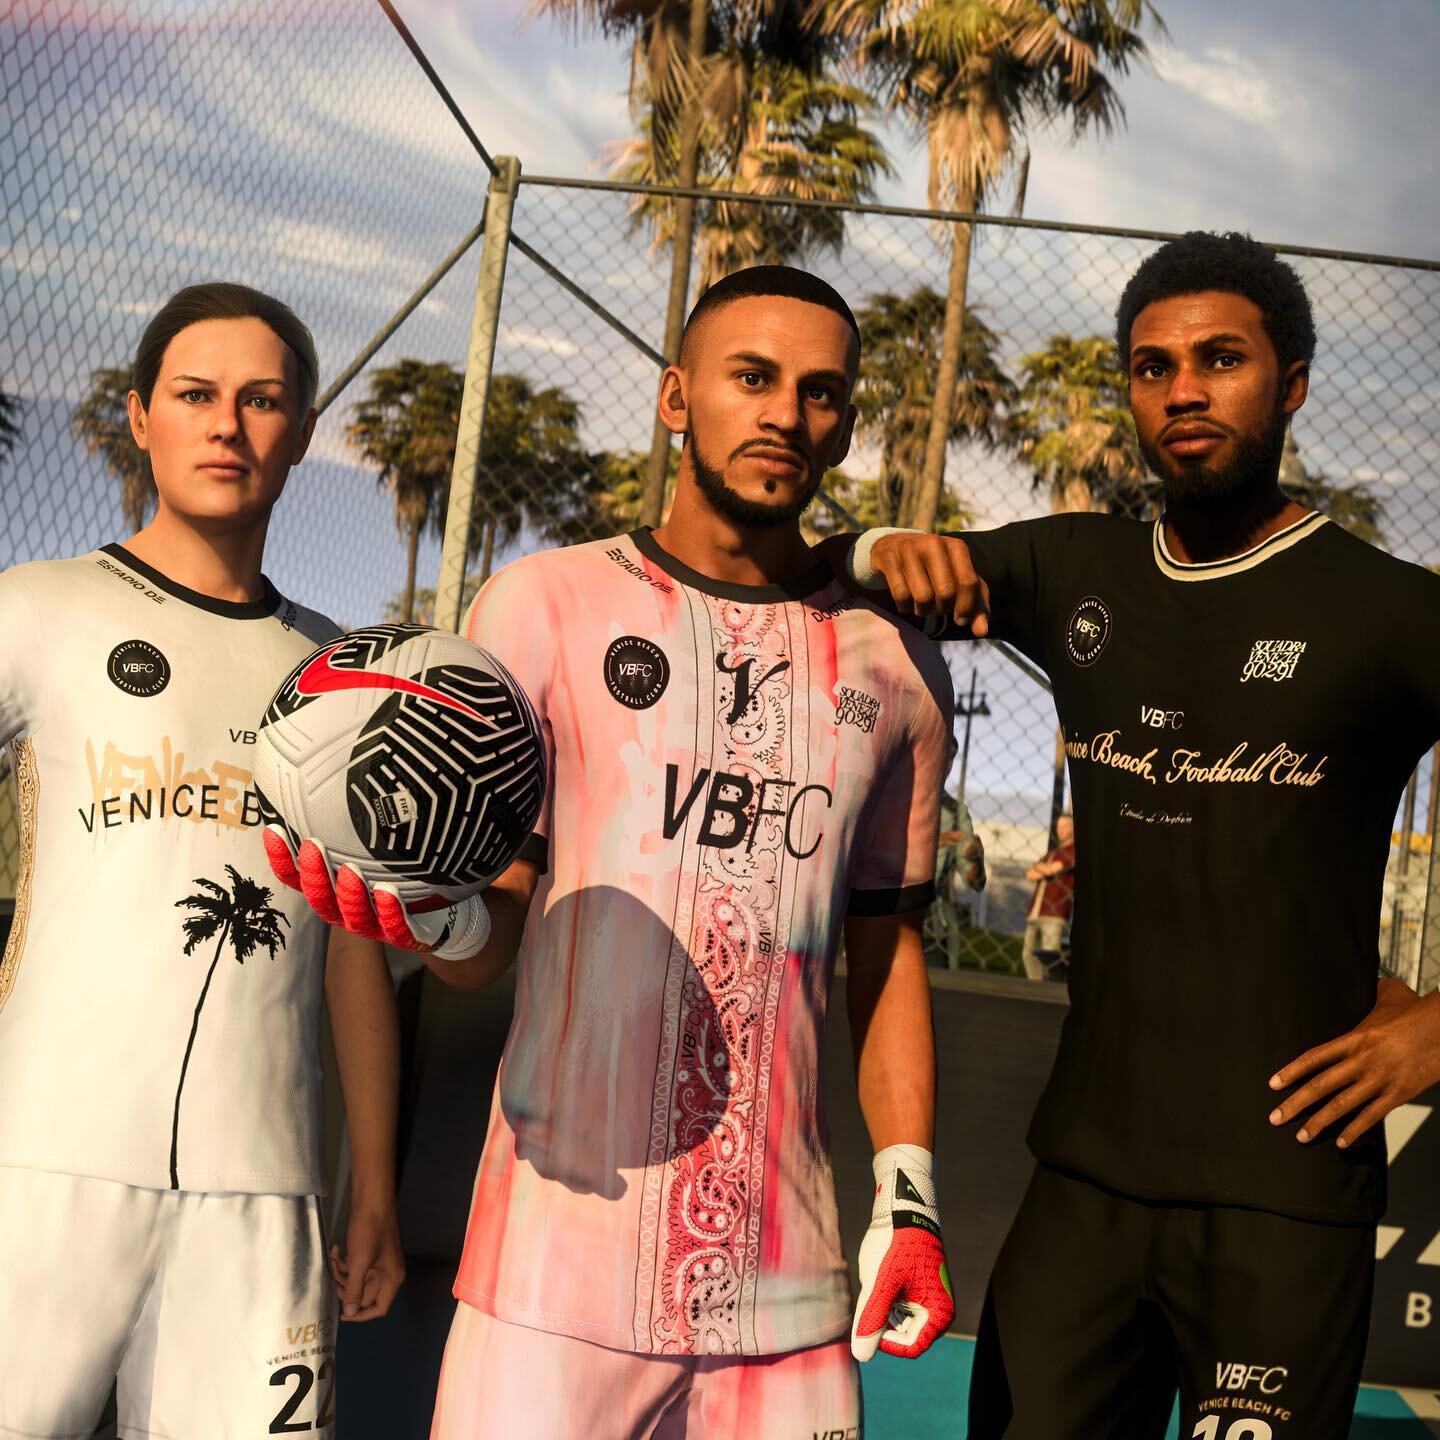 The 2023/24 Venice Beach Football Club Home, Away, and Goalkeeper kits released to the world in @easportsfc FC24 

Coming to the physical world soon.